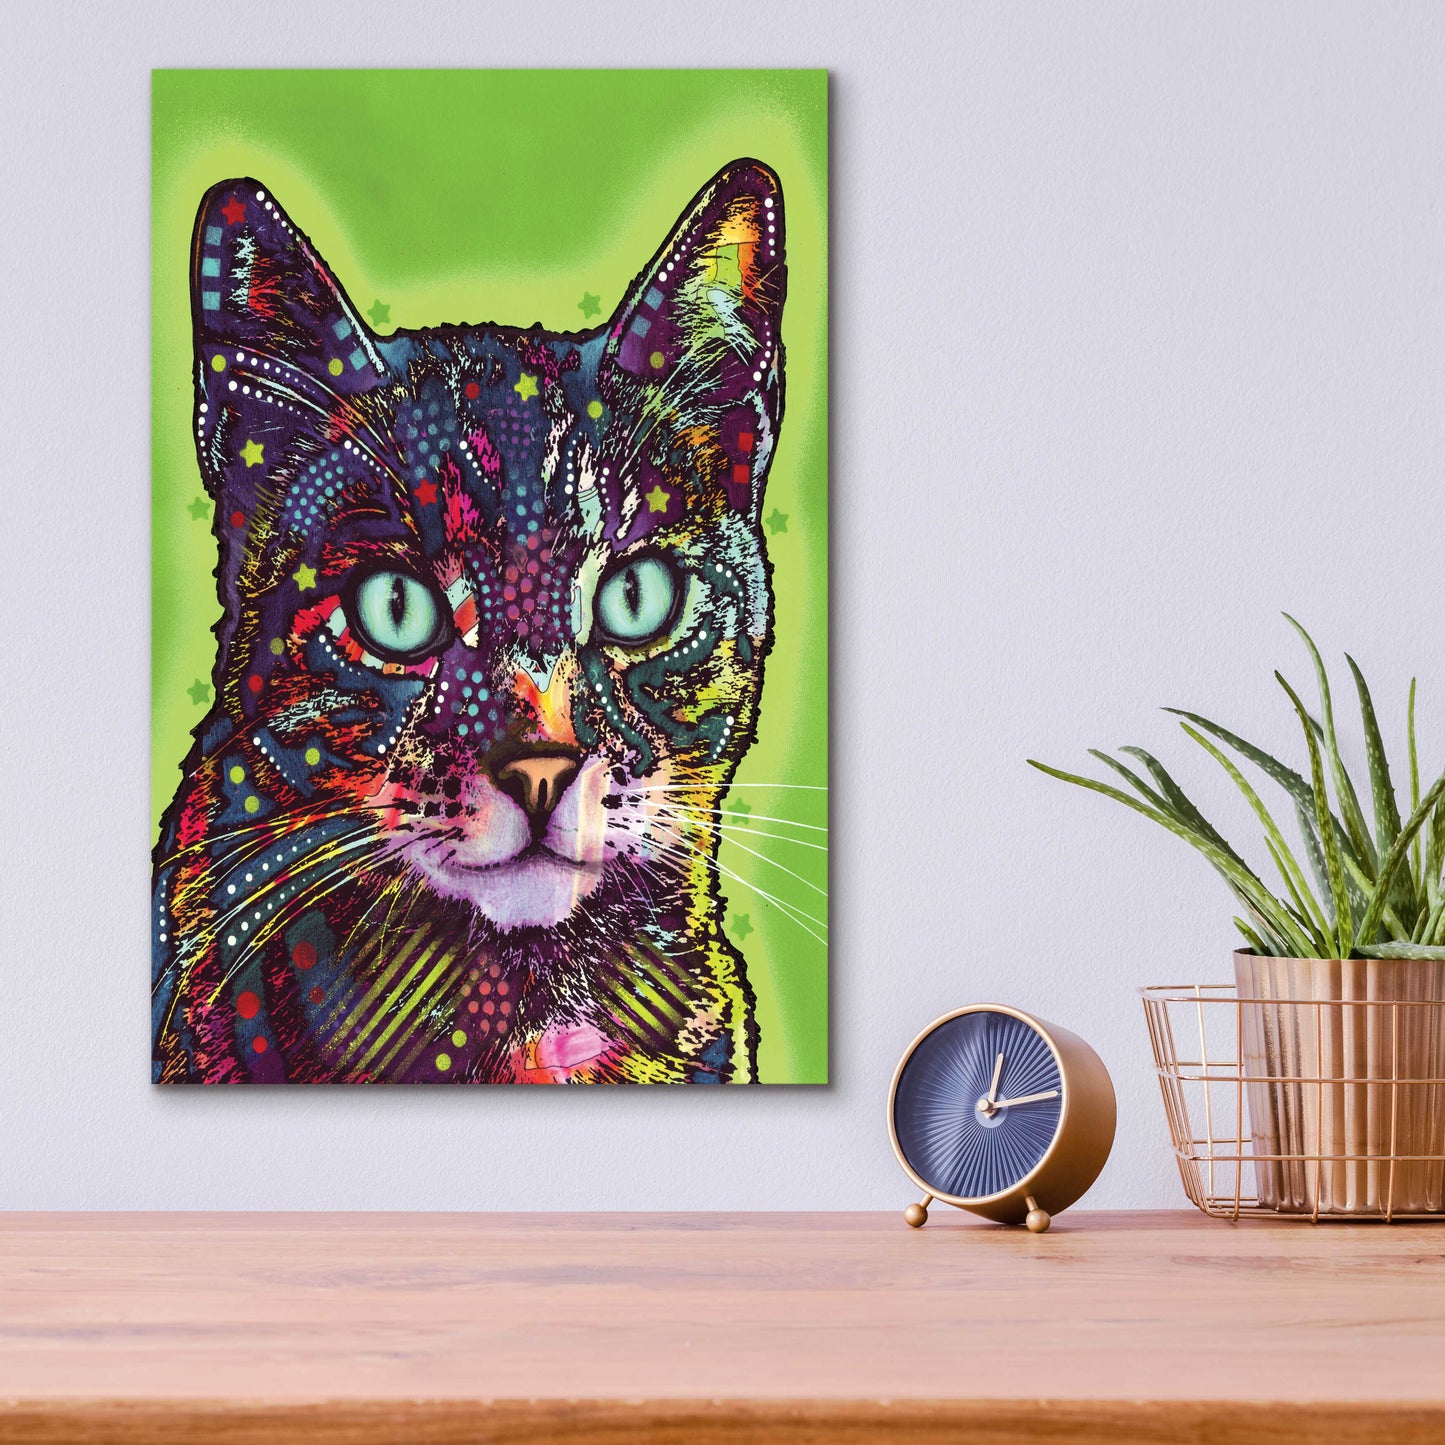 Epic Art 'Watchful Cat' by Dean Russo, Acrylic Glass Wall Art,12x16